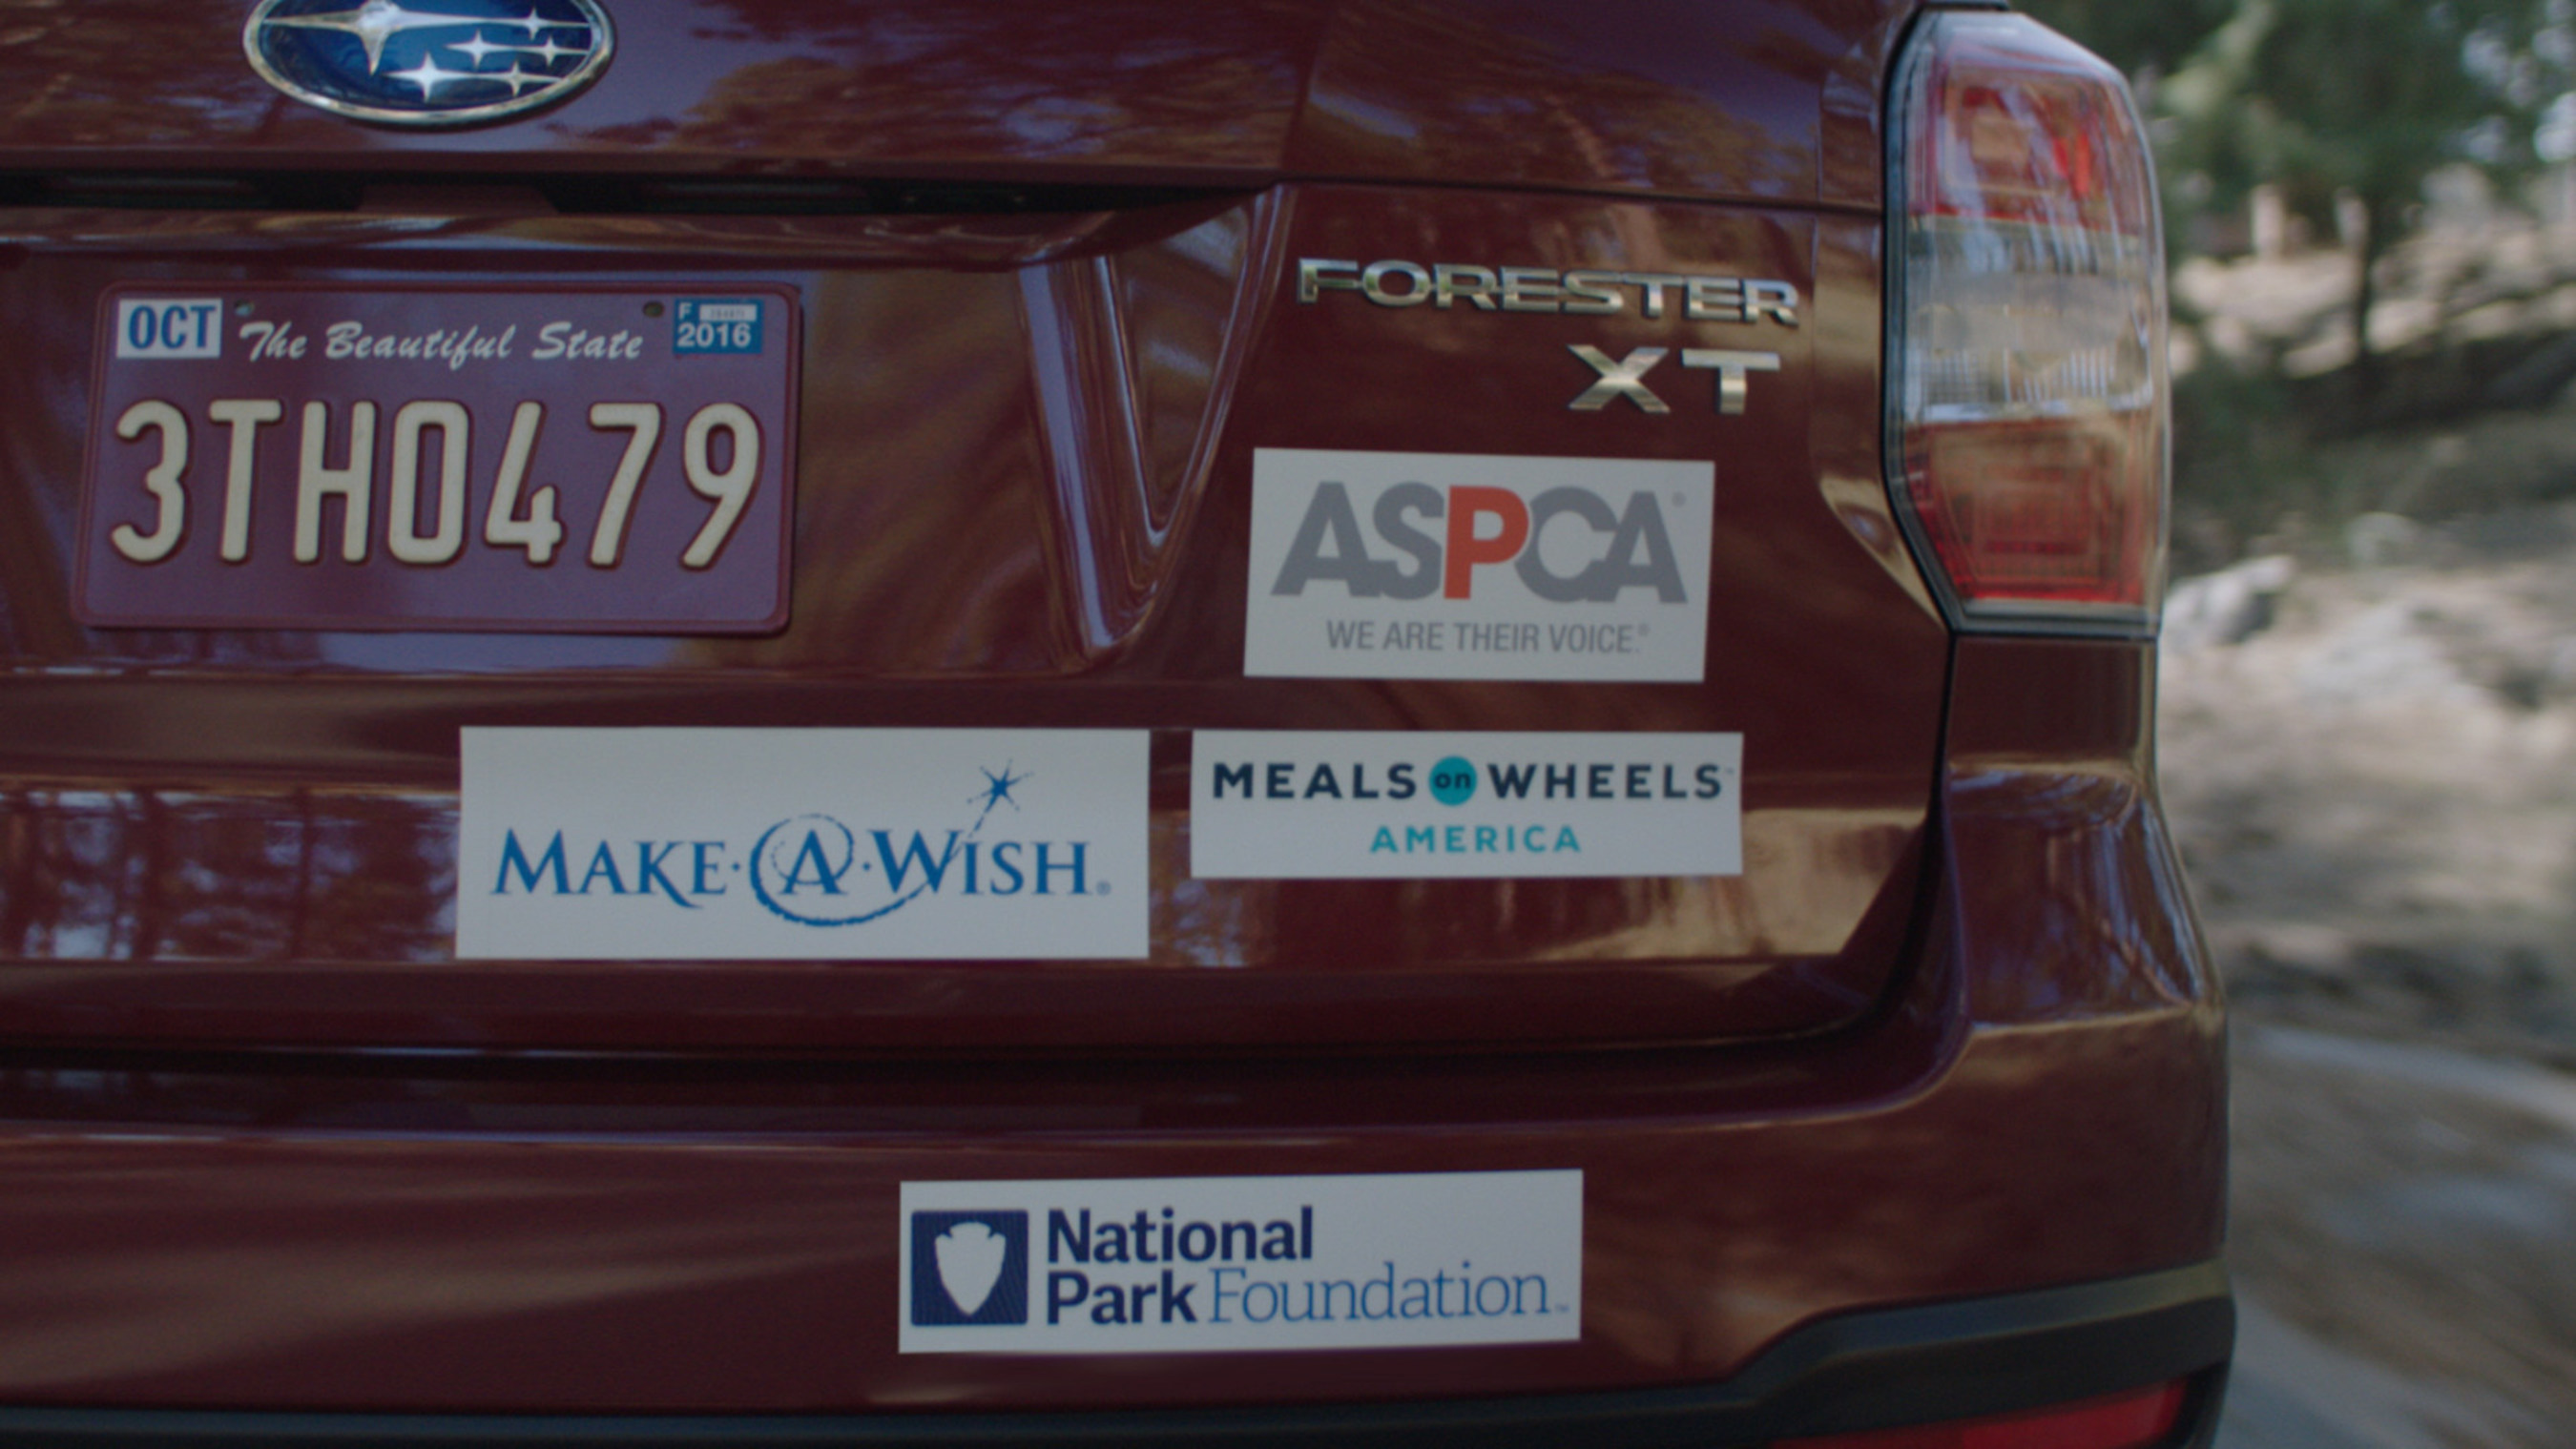 Subaru launches its eighth annual Share the Love campaign. From November 19, 2015 to January 2, 2016, Subaru will donate $250 for every new Subaru vehicle sold or leased to the customer's choice of charitable partners: ASPCA(R), Make-A-Wish(R), Meals on Wheels America, National Park Foundation or a hometown charity selected by participating retailers.